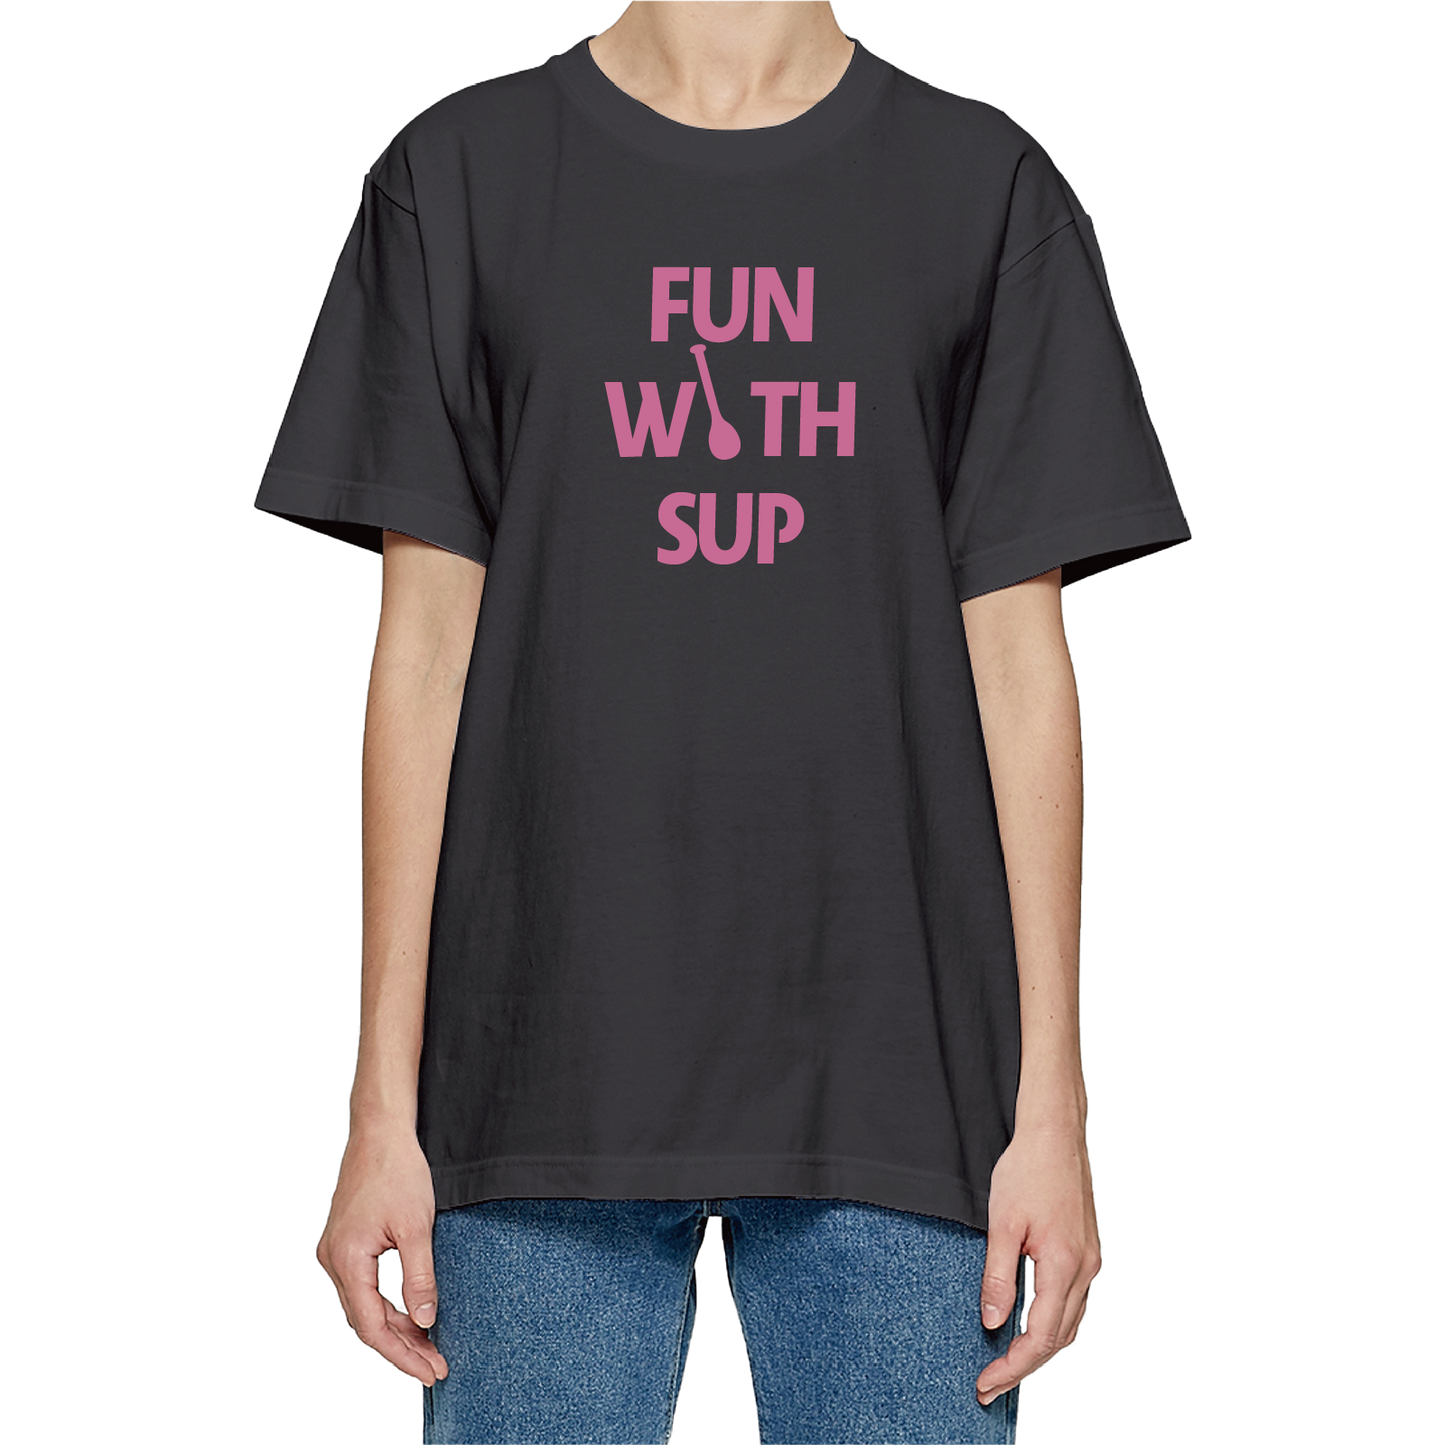 Pink Fun With SUP - Unisex Paddling 100% Cotton T-shirt with Different Colors | SUPZOOM